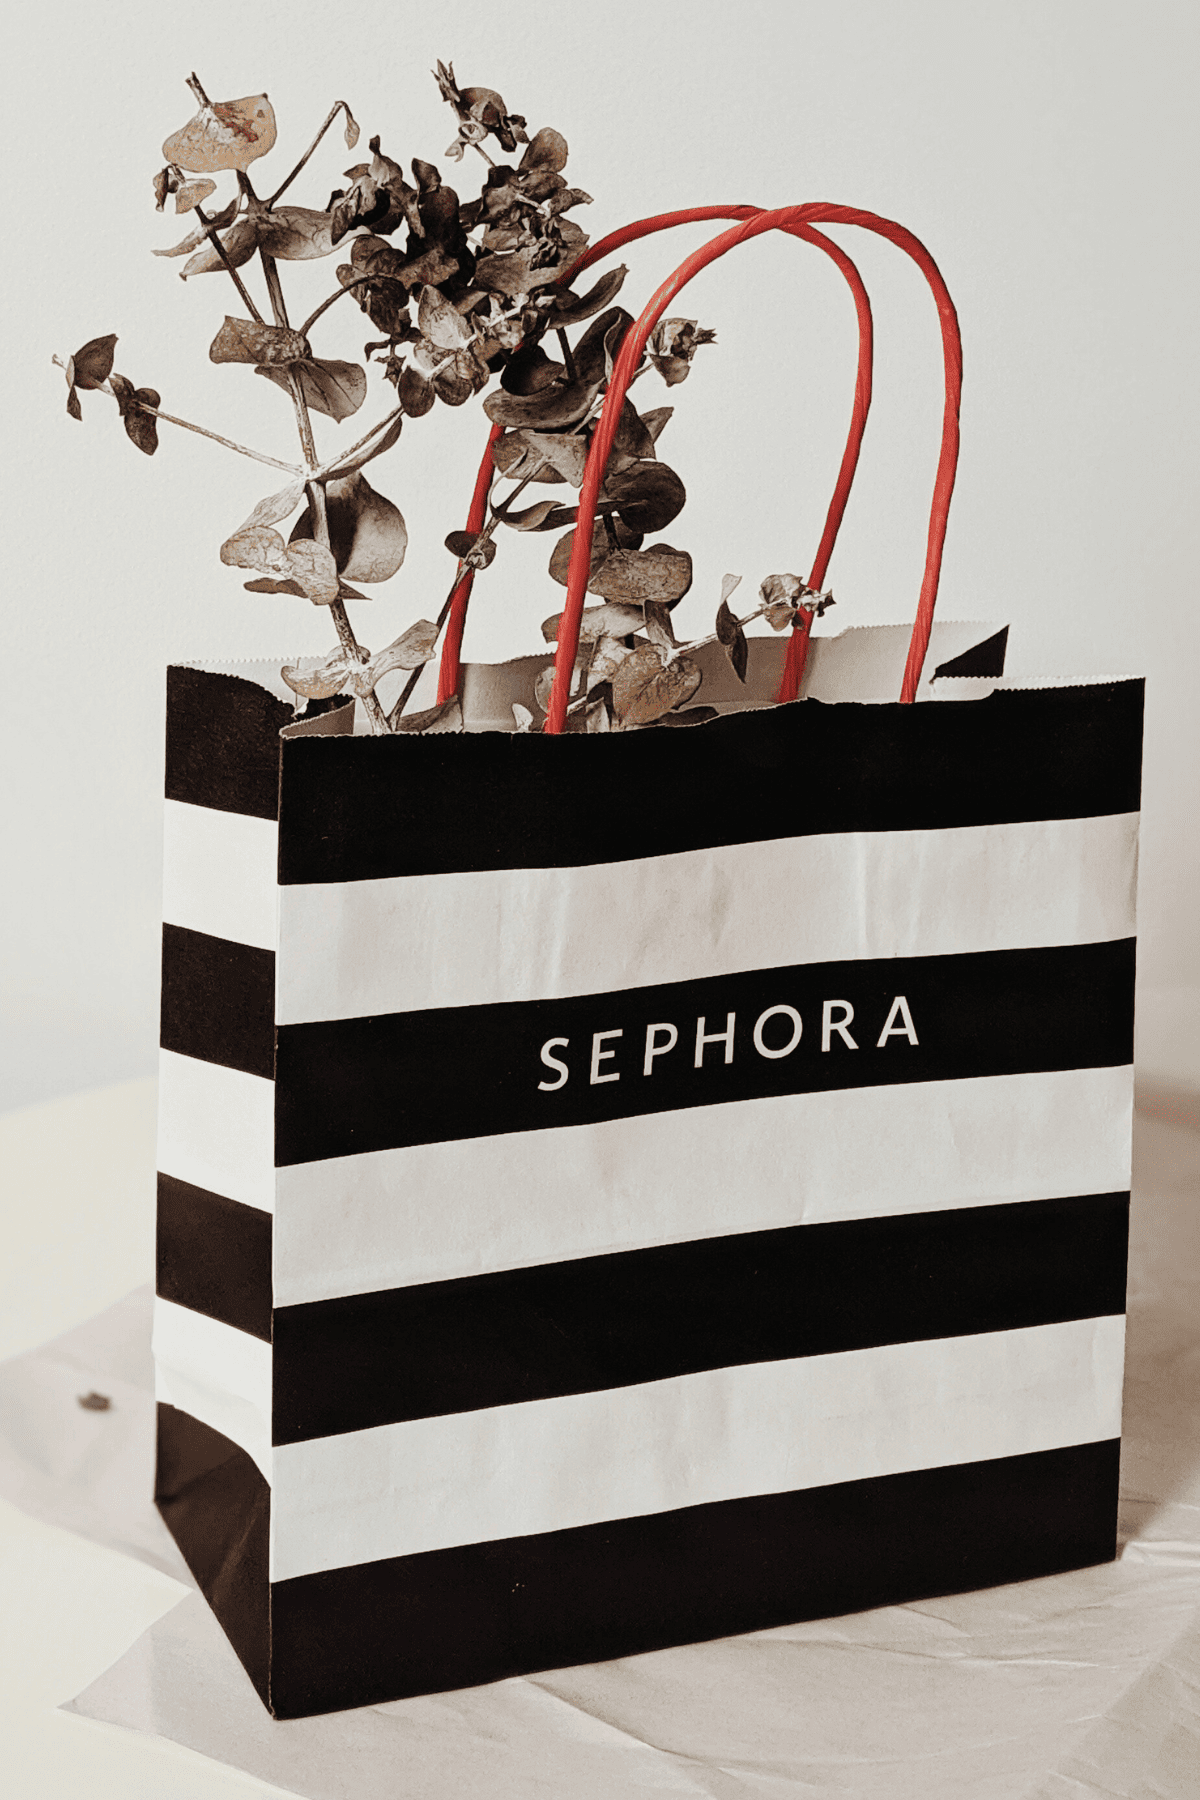 Cruelty-Free Brands At Sephora: Your Guide To Ethical Shopping